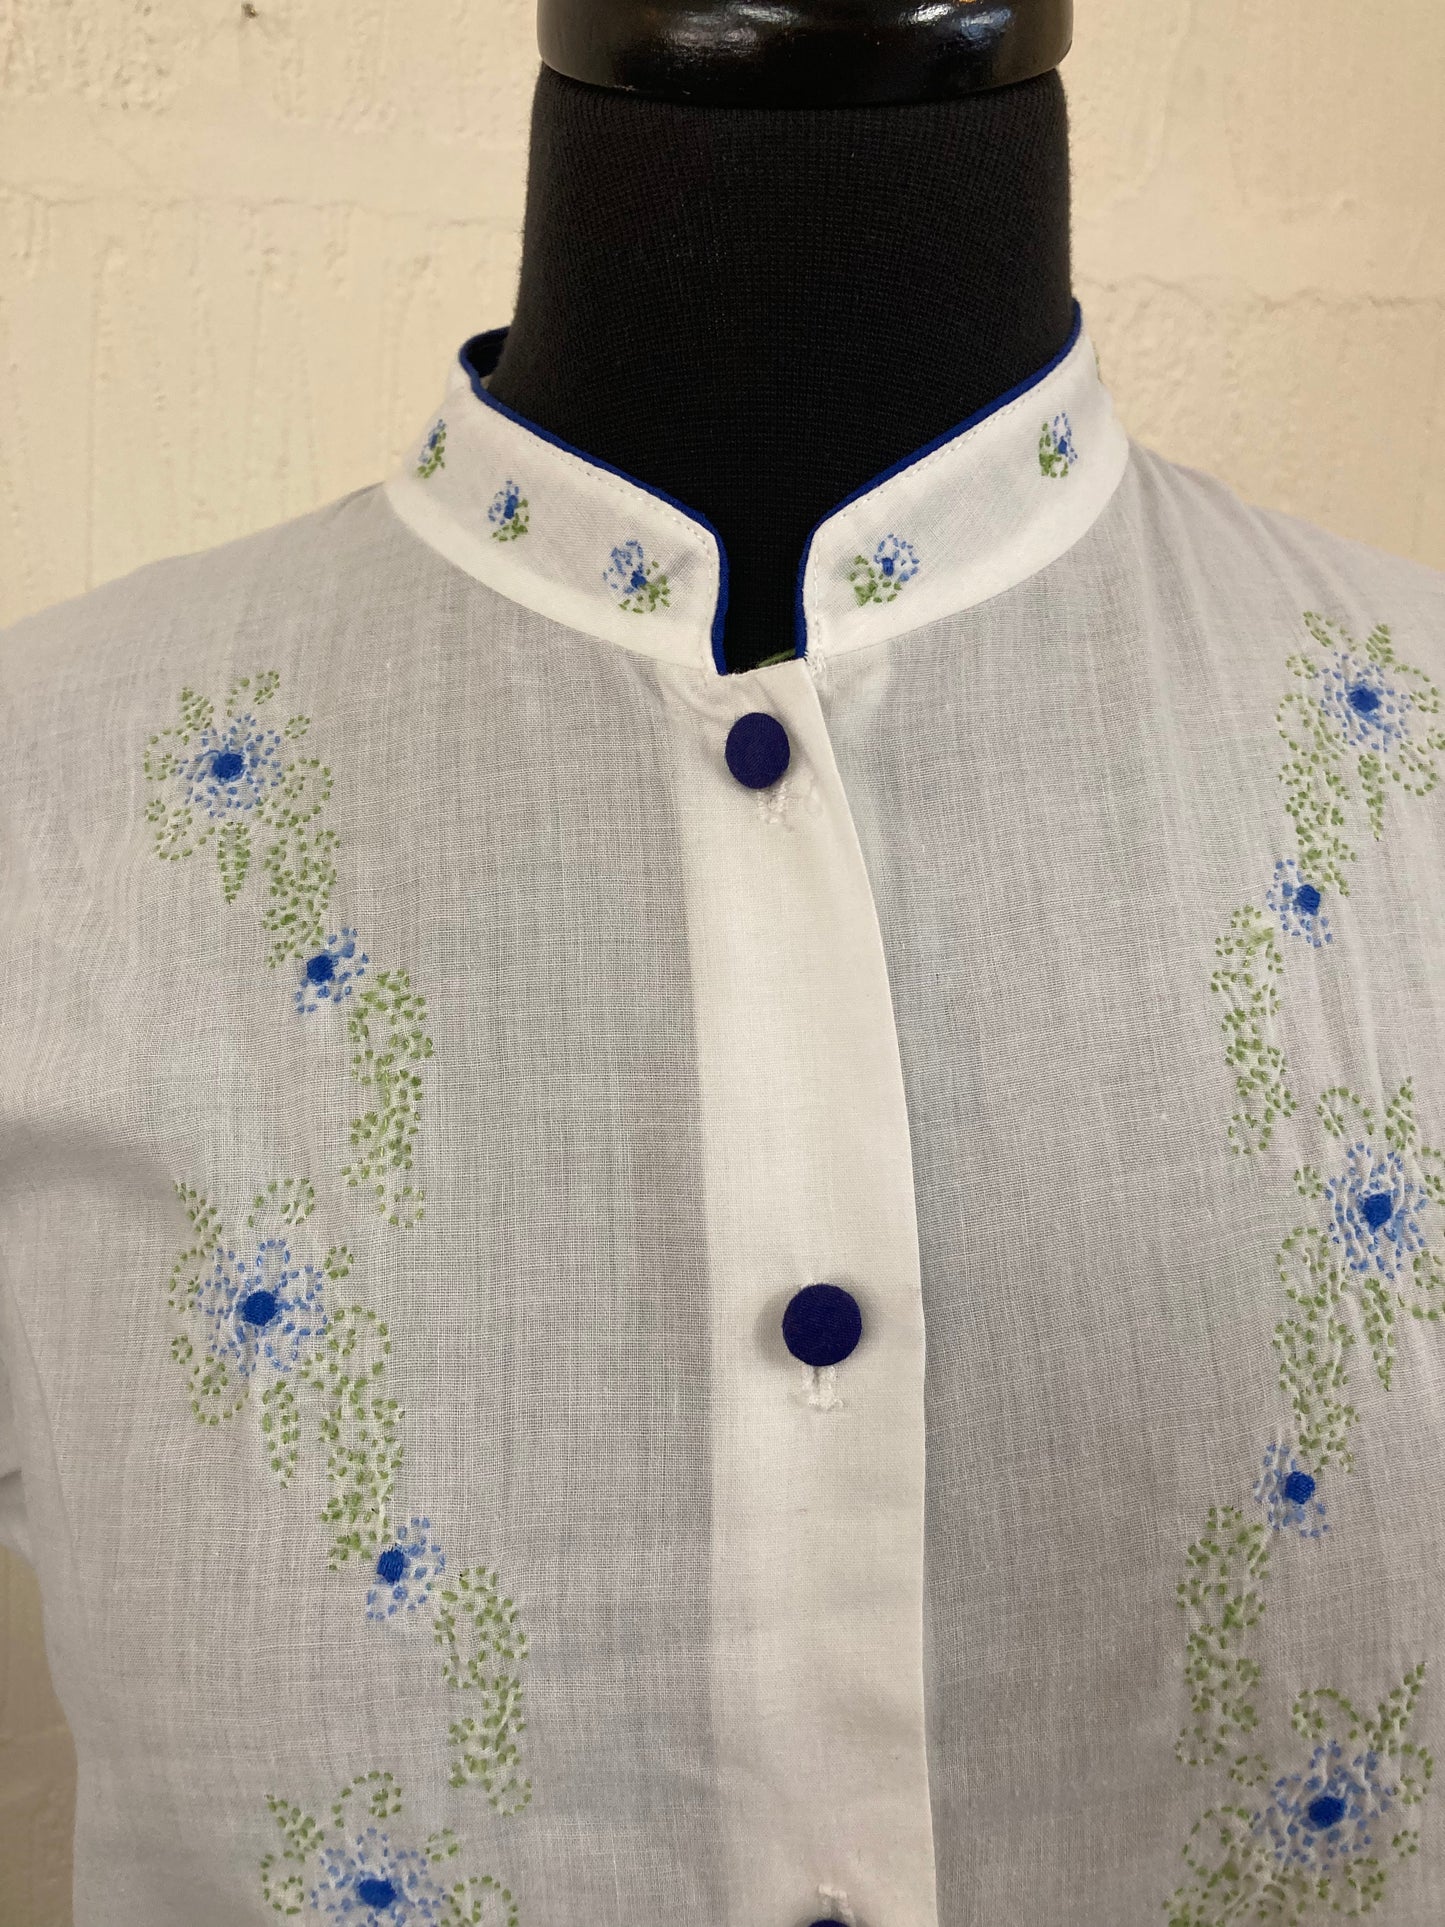 Vintage Cream with Blue Details and Embroidery  Shirt Size L